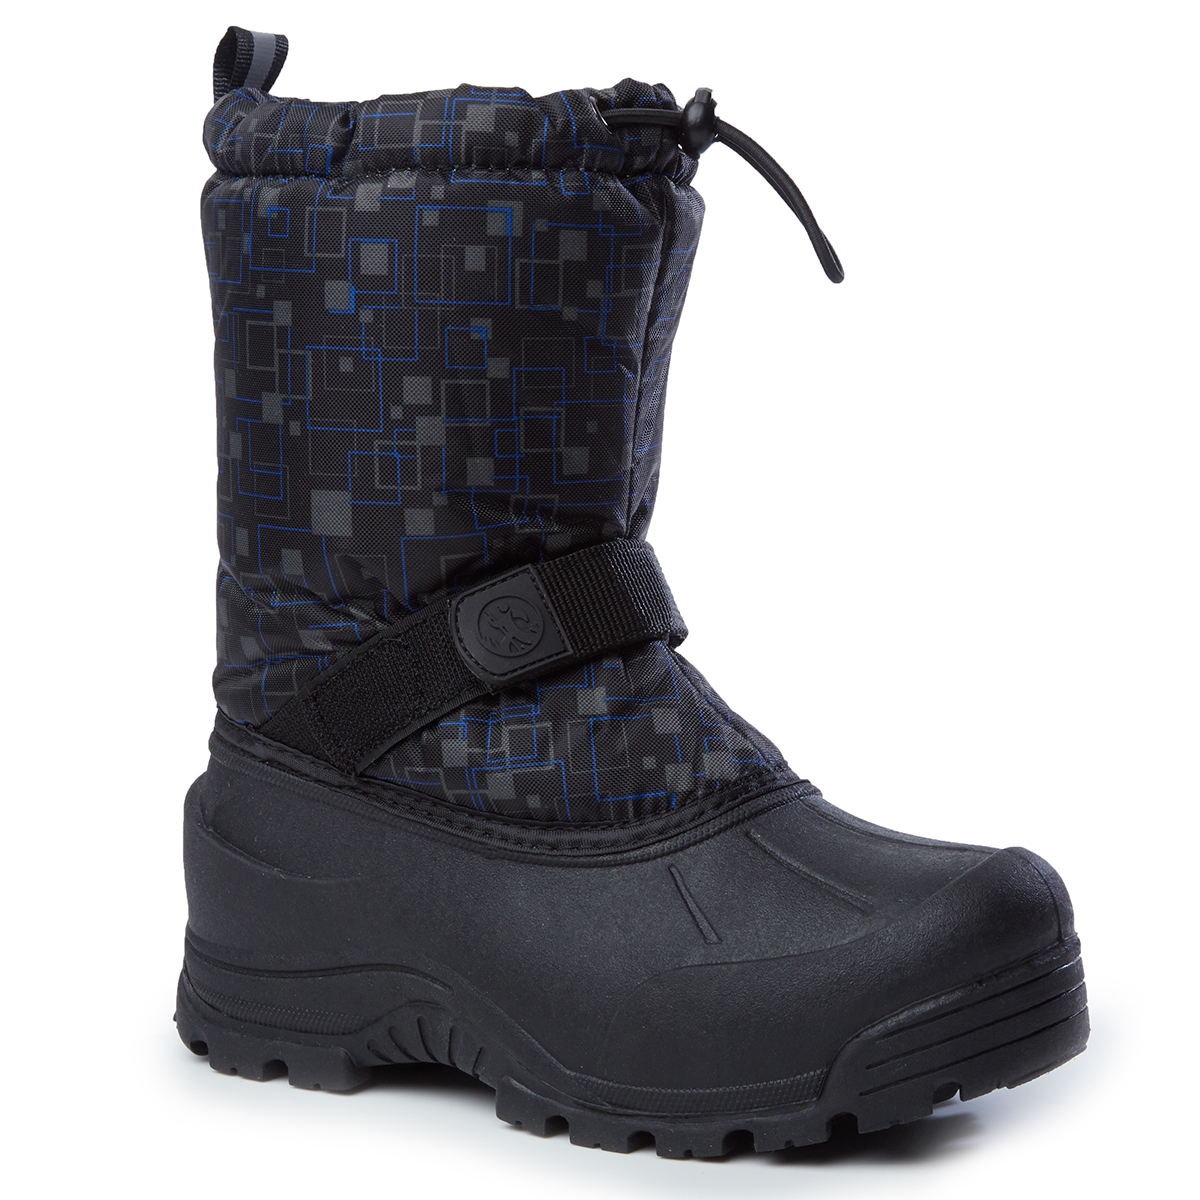 Northside Boys' Frosty Waterproof Insulated Storm Boots - Black, 3